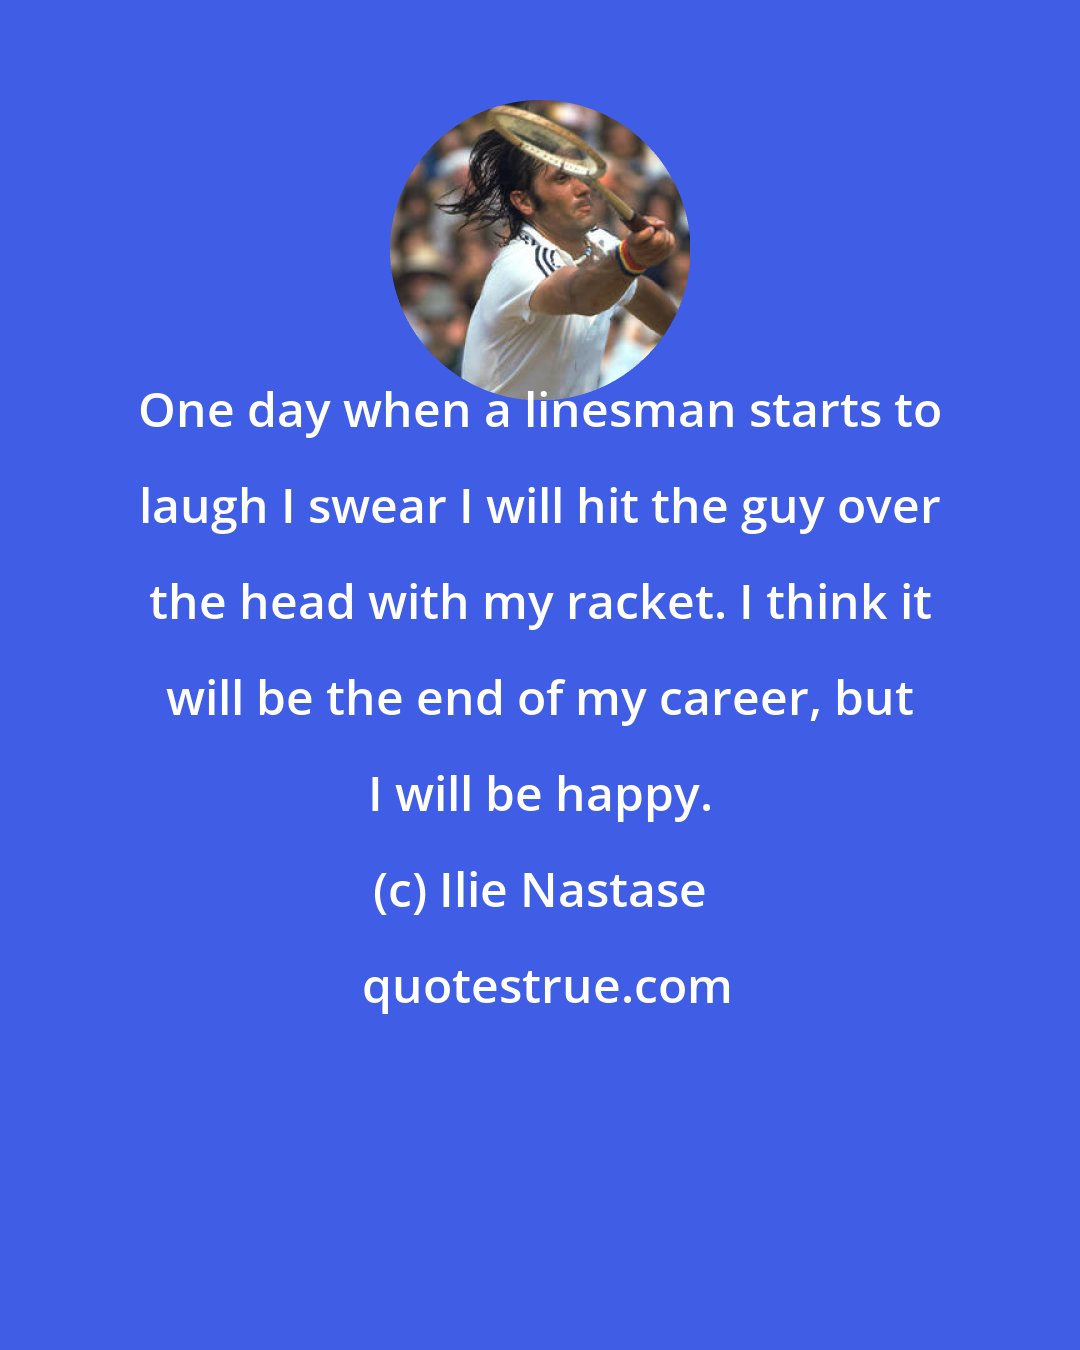 Ilie Nastase: One day when a linesman starts to laugh I swear I will hit the guy over the head with my racket. I think it will be the end of my career, but I will be happy.